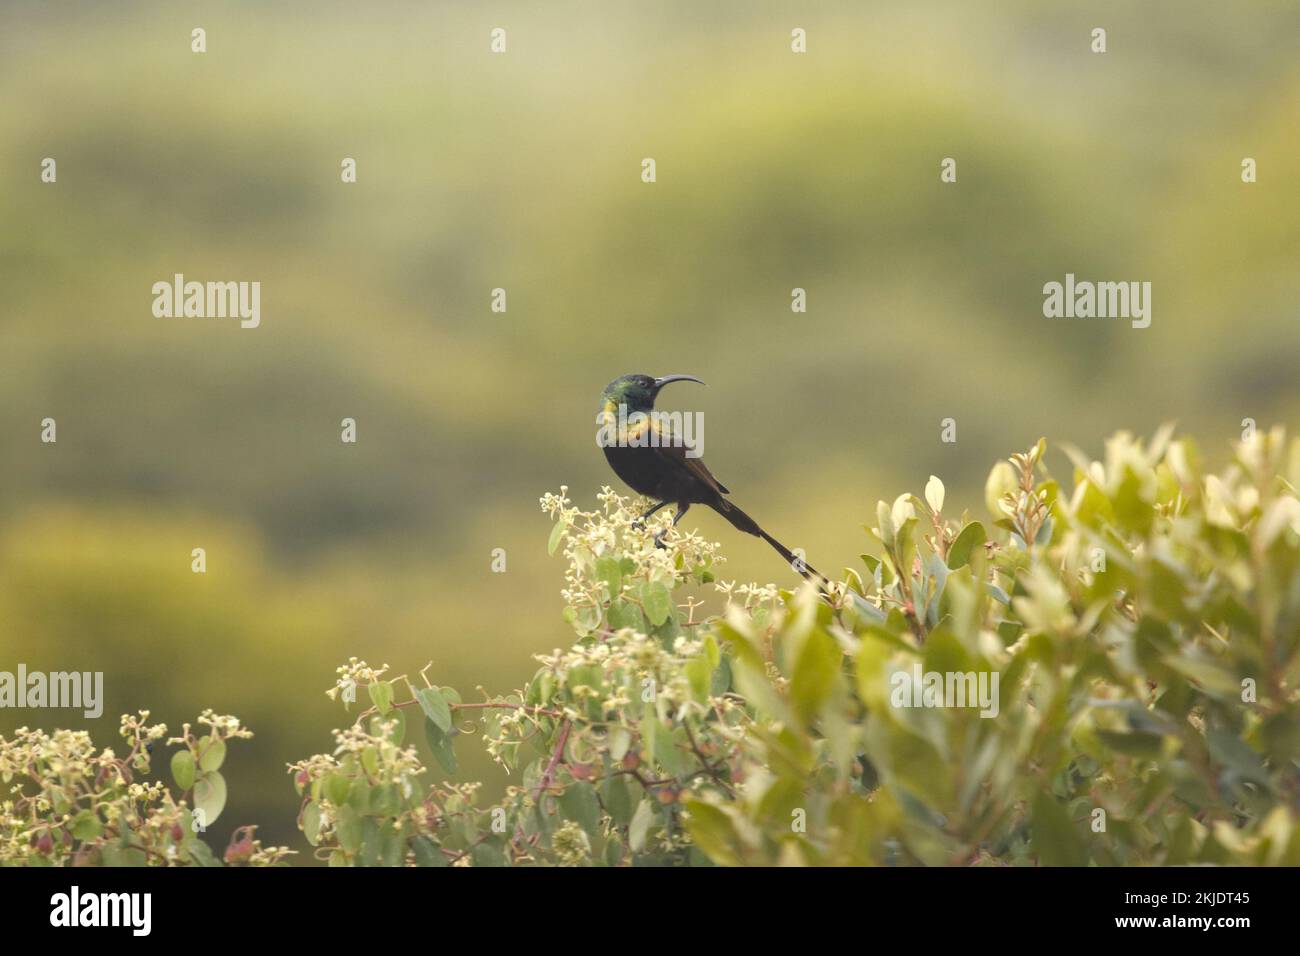 A Bronzy sunbird (Nectarinia kilimensis) perched on a flowering shrub on blurred background Stock Photo